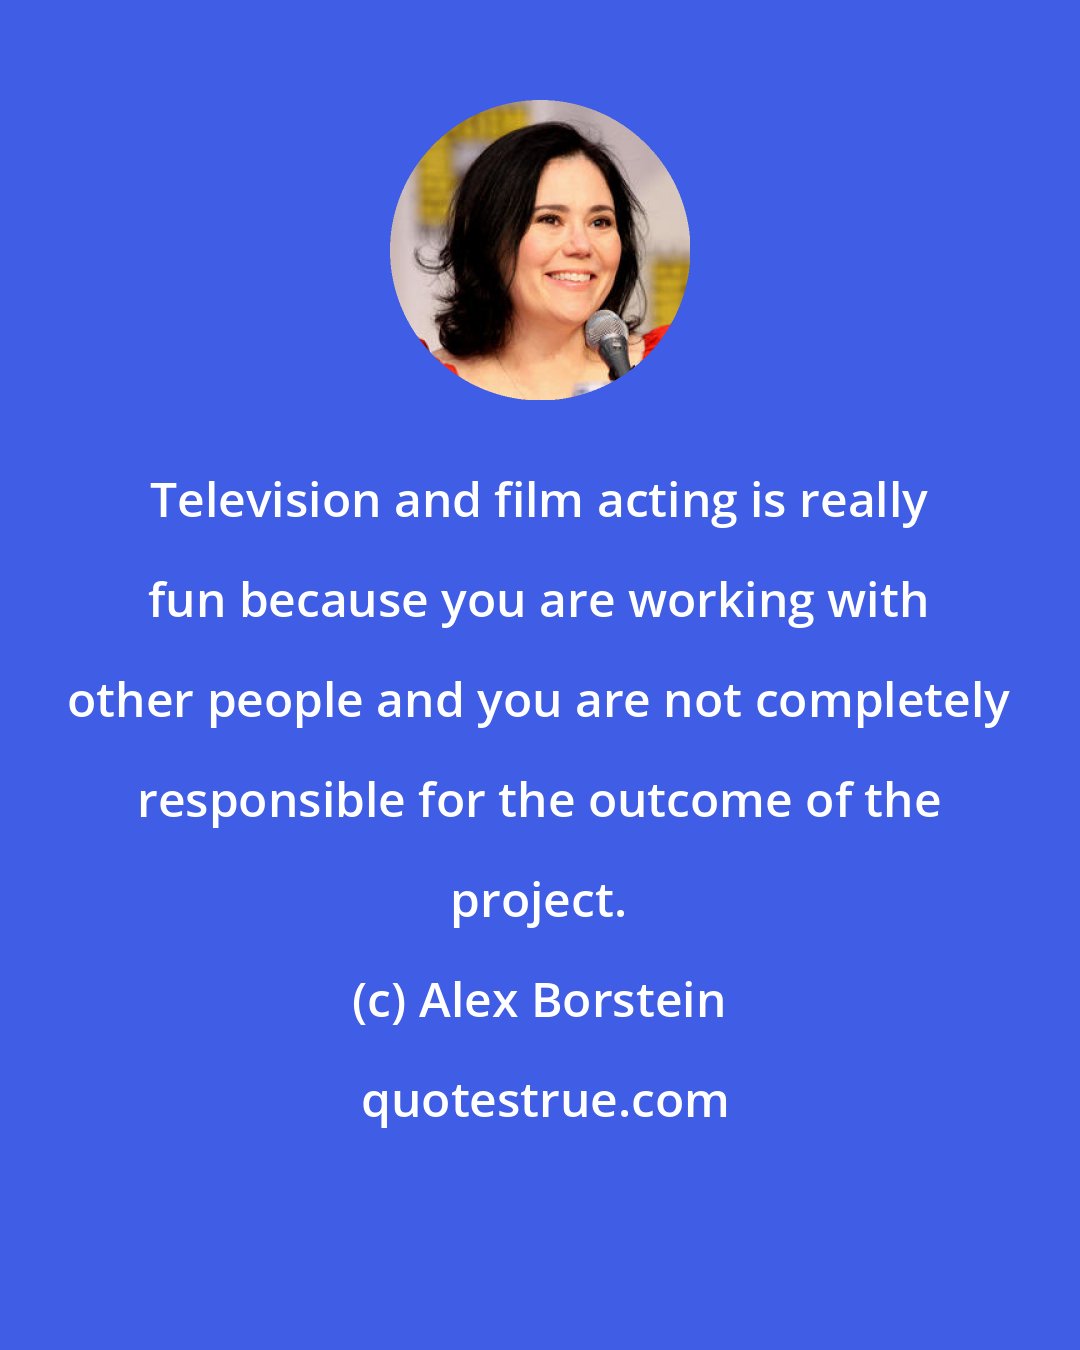 Alex Borstein: Television and film acting is really fun because you are working with other people and you are not completely responsible for the outcome of the project.